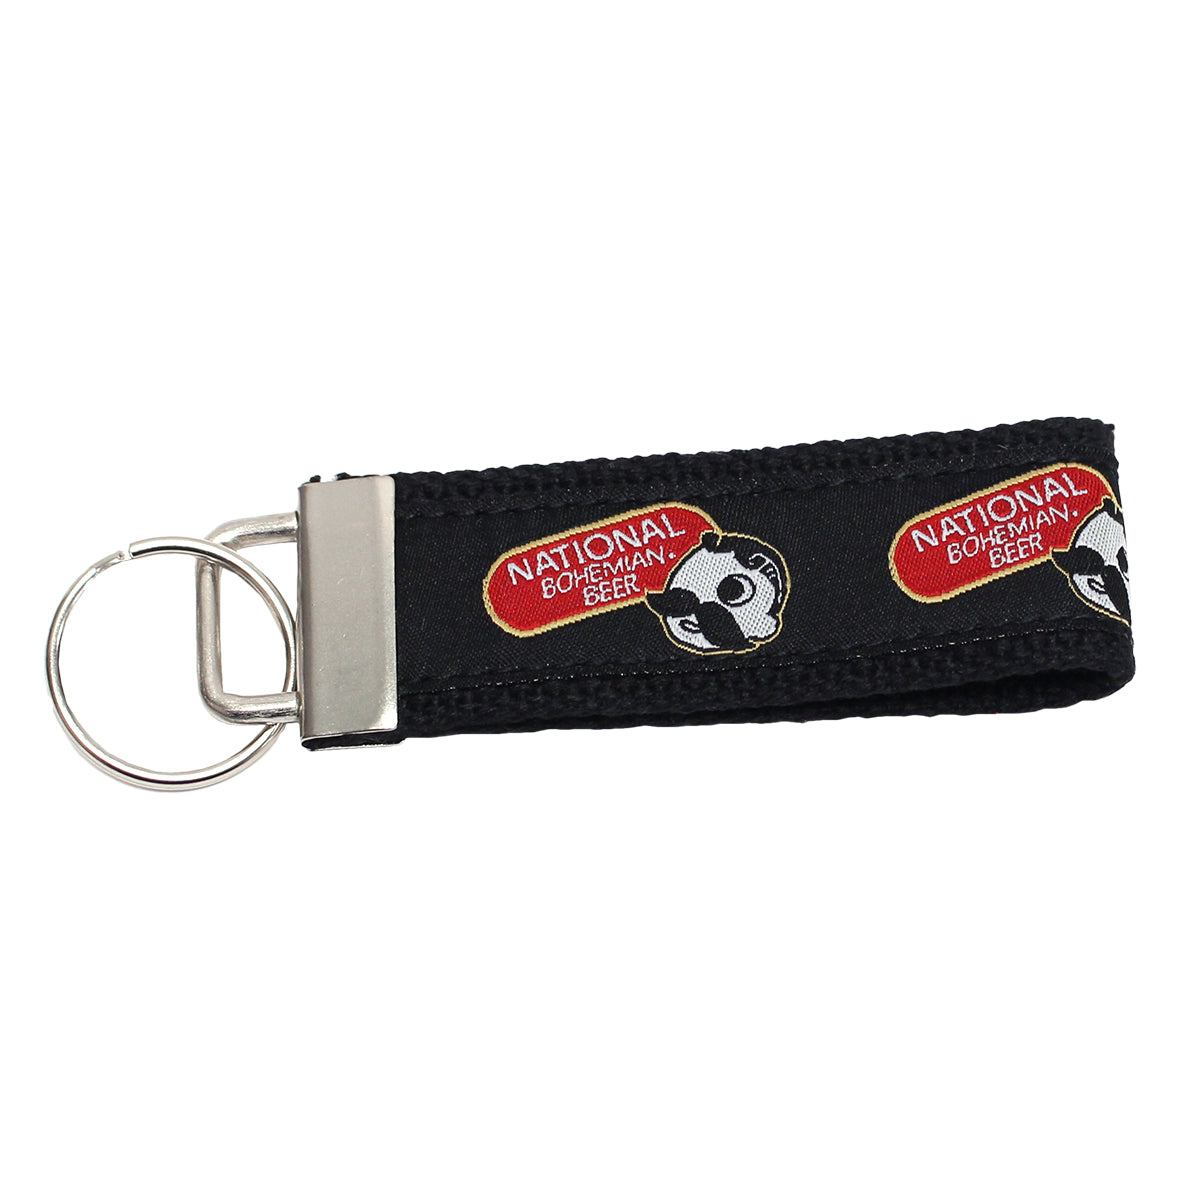 National Bohemian Beer (Black) / Key Chain - Route One Apparel